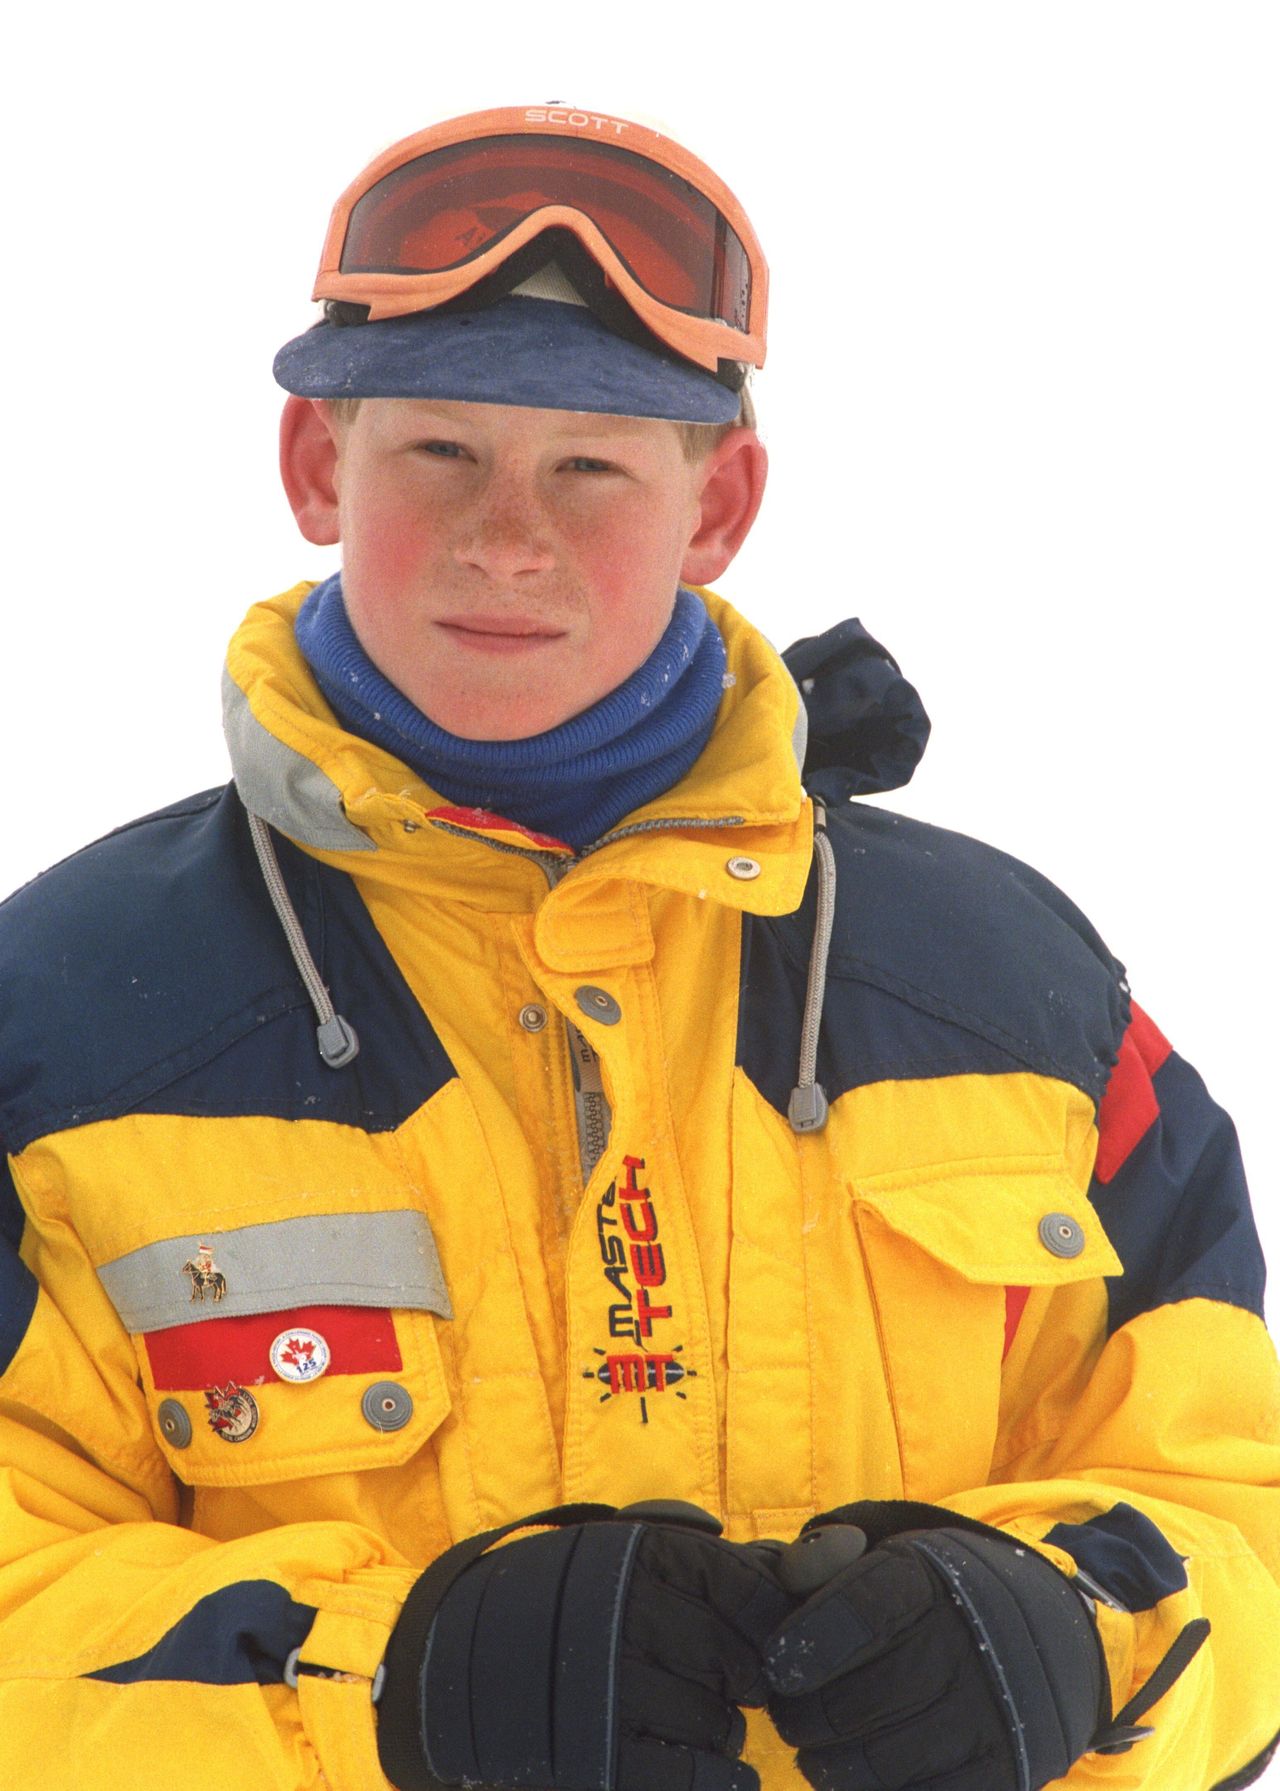 A young Prince Harry skiing In Whistler, B.C.